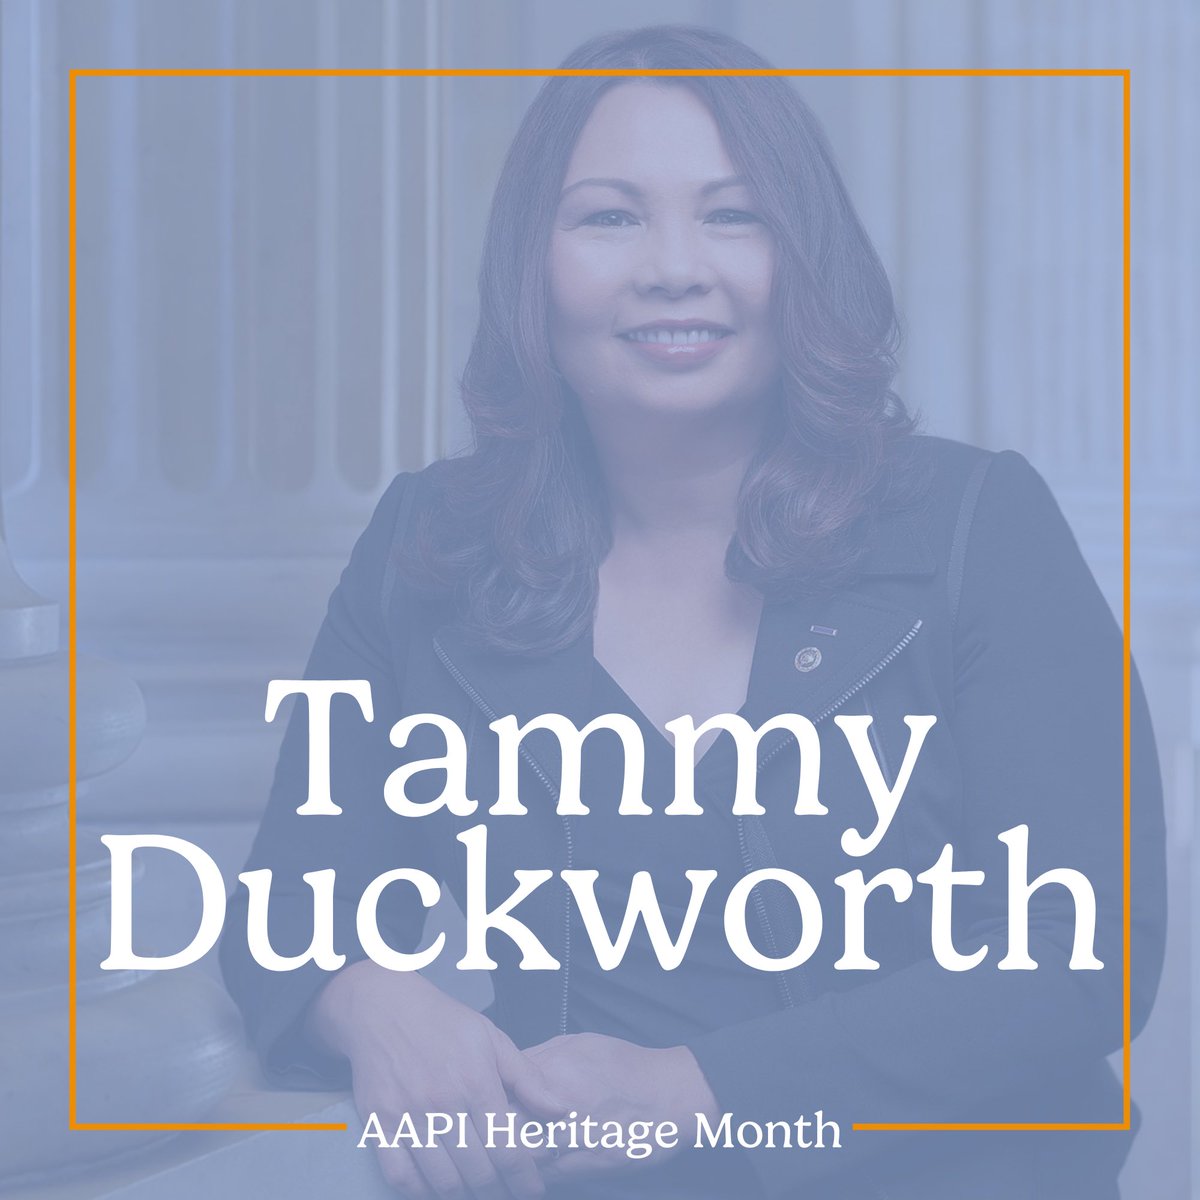 As we continue to celebrate #AAPIHeritageMonth, let’s highlight individuals who have demonstrated exceptional ldsp. Check out these amazing US congress members who have broken barriers & paved the way for future generations of AAPI in politics & public service! #CAAPLEproud